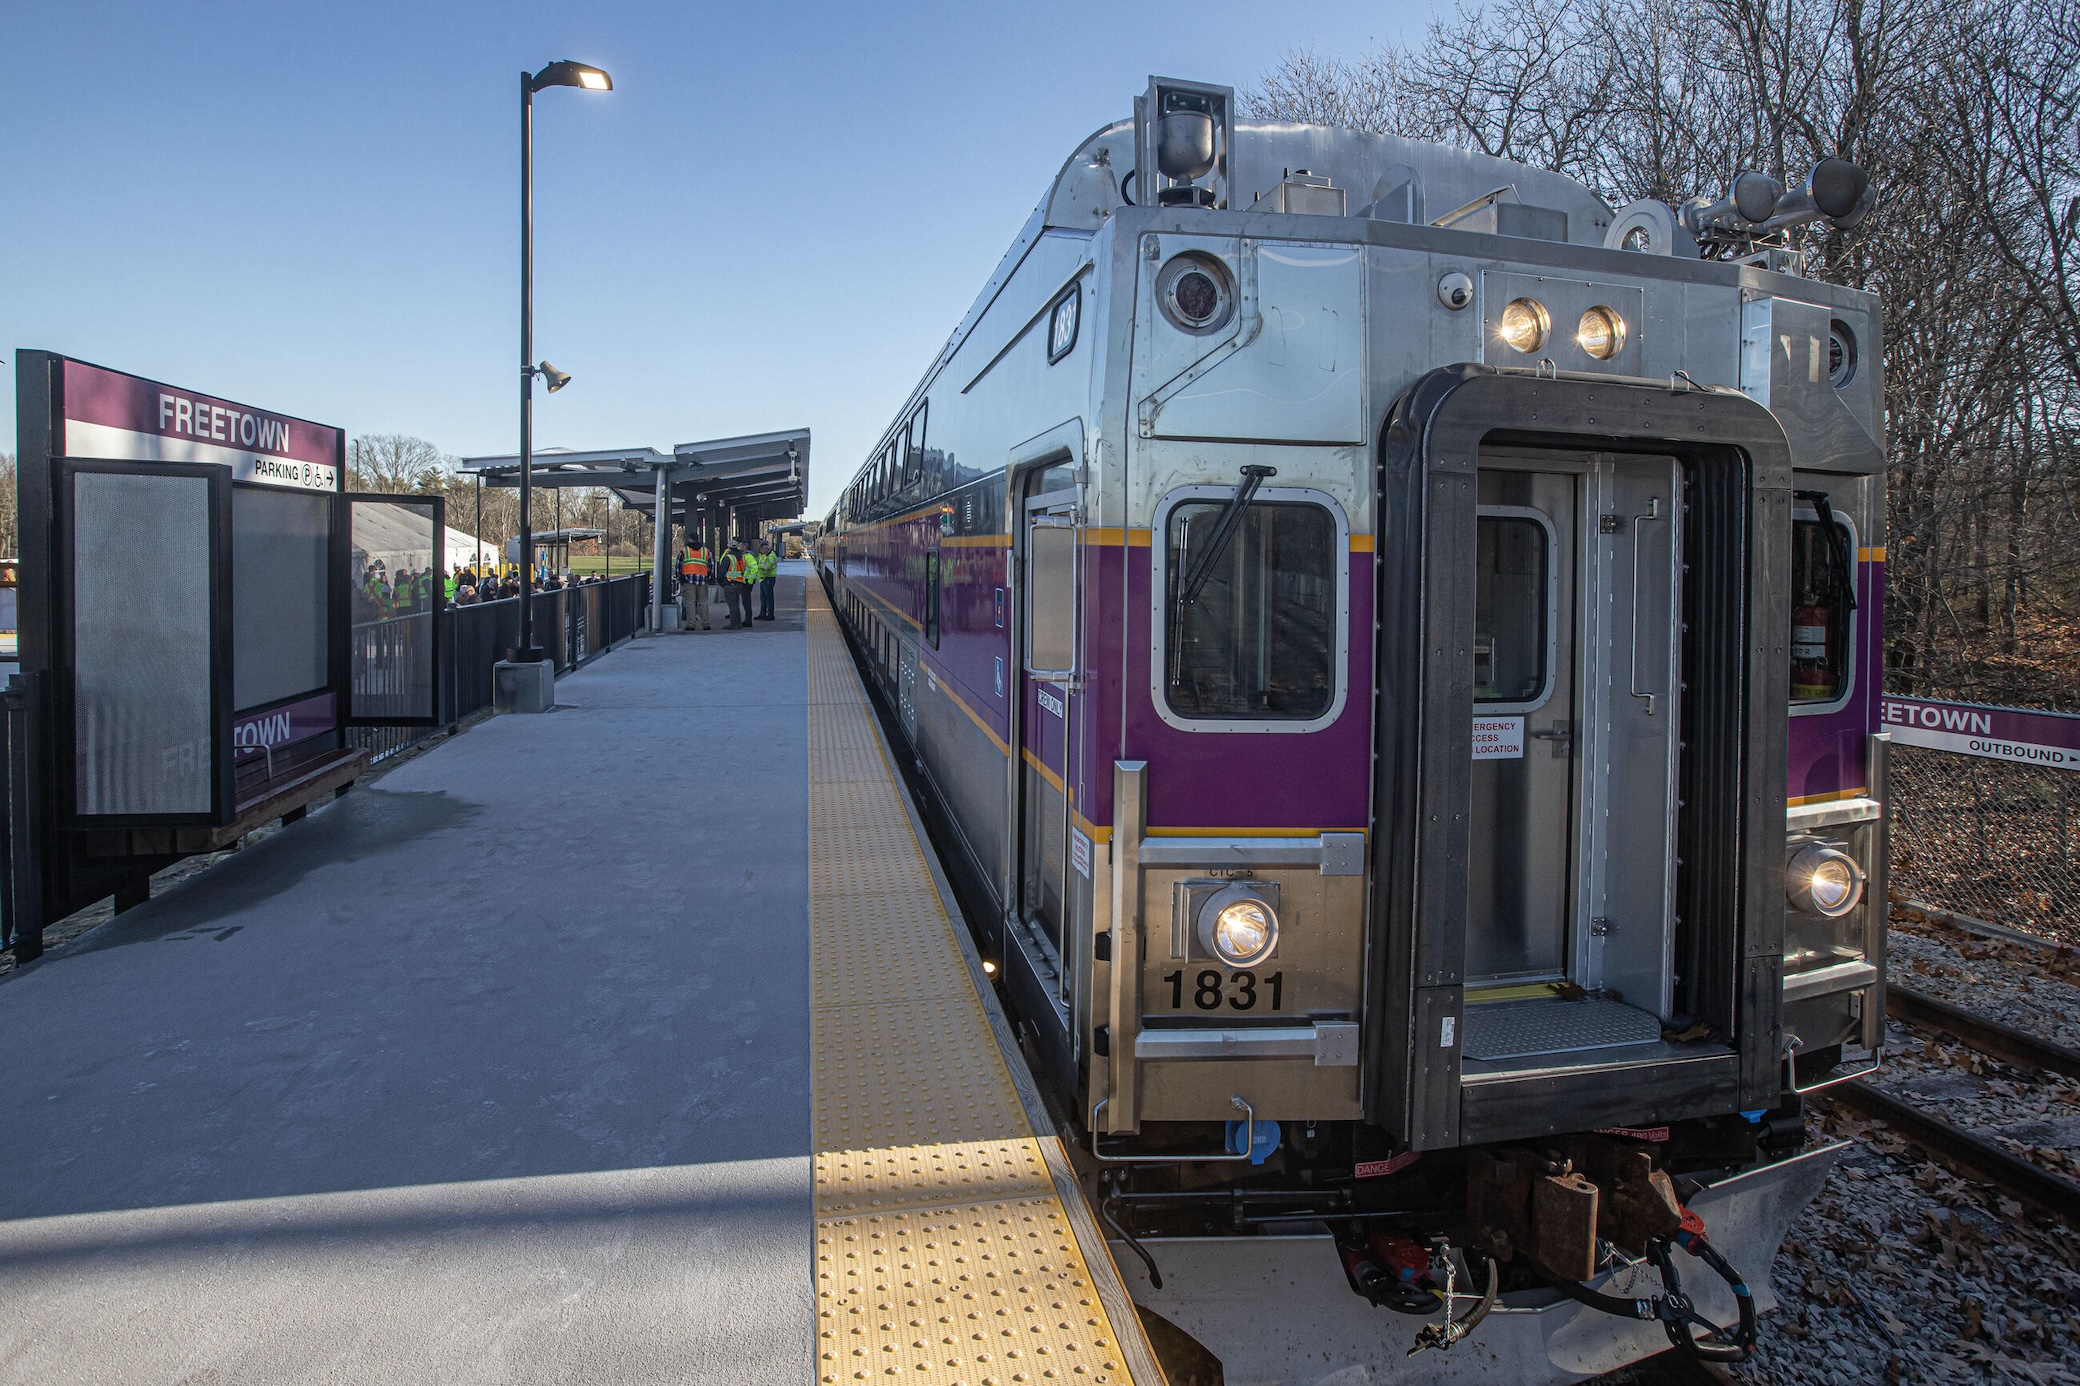 The end of an MBTA commuter rail train next to a train platform. Purple signs on the platform indicate it is Freetown station. Several workers in yellow vests are under a canopy at the far end of the platform in the distance.